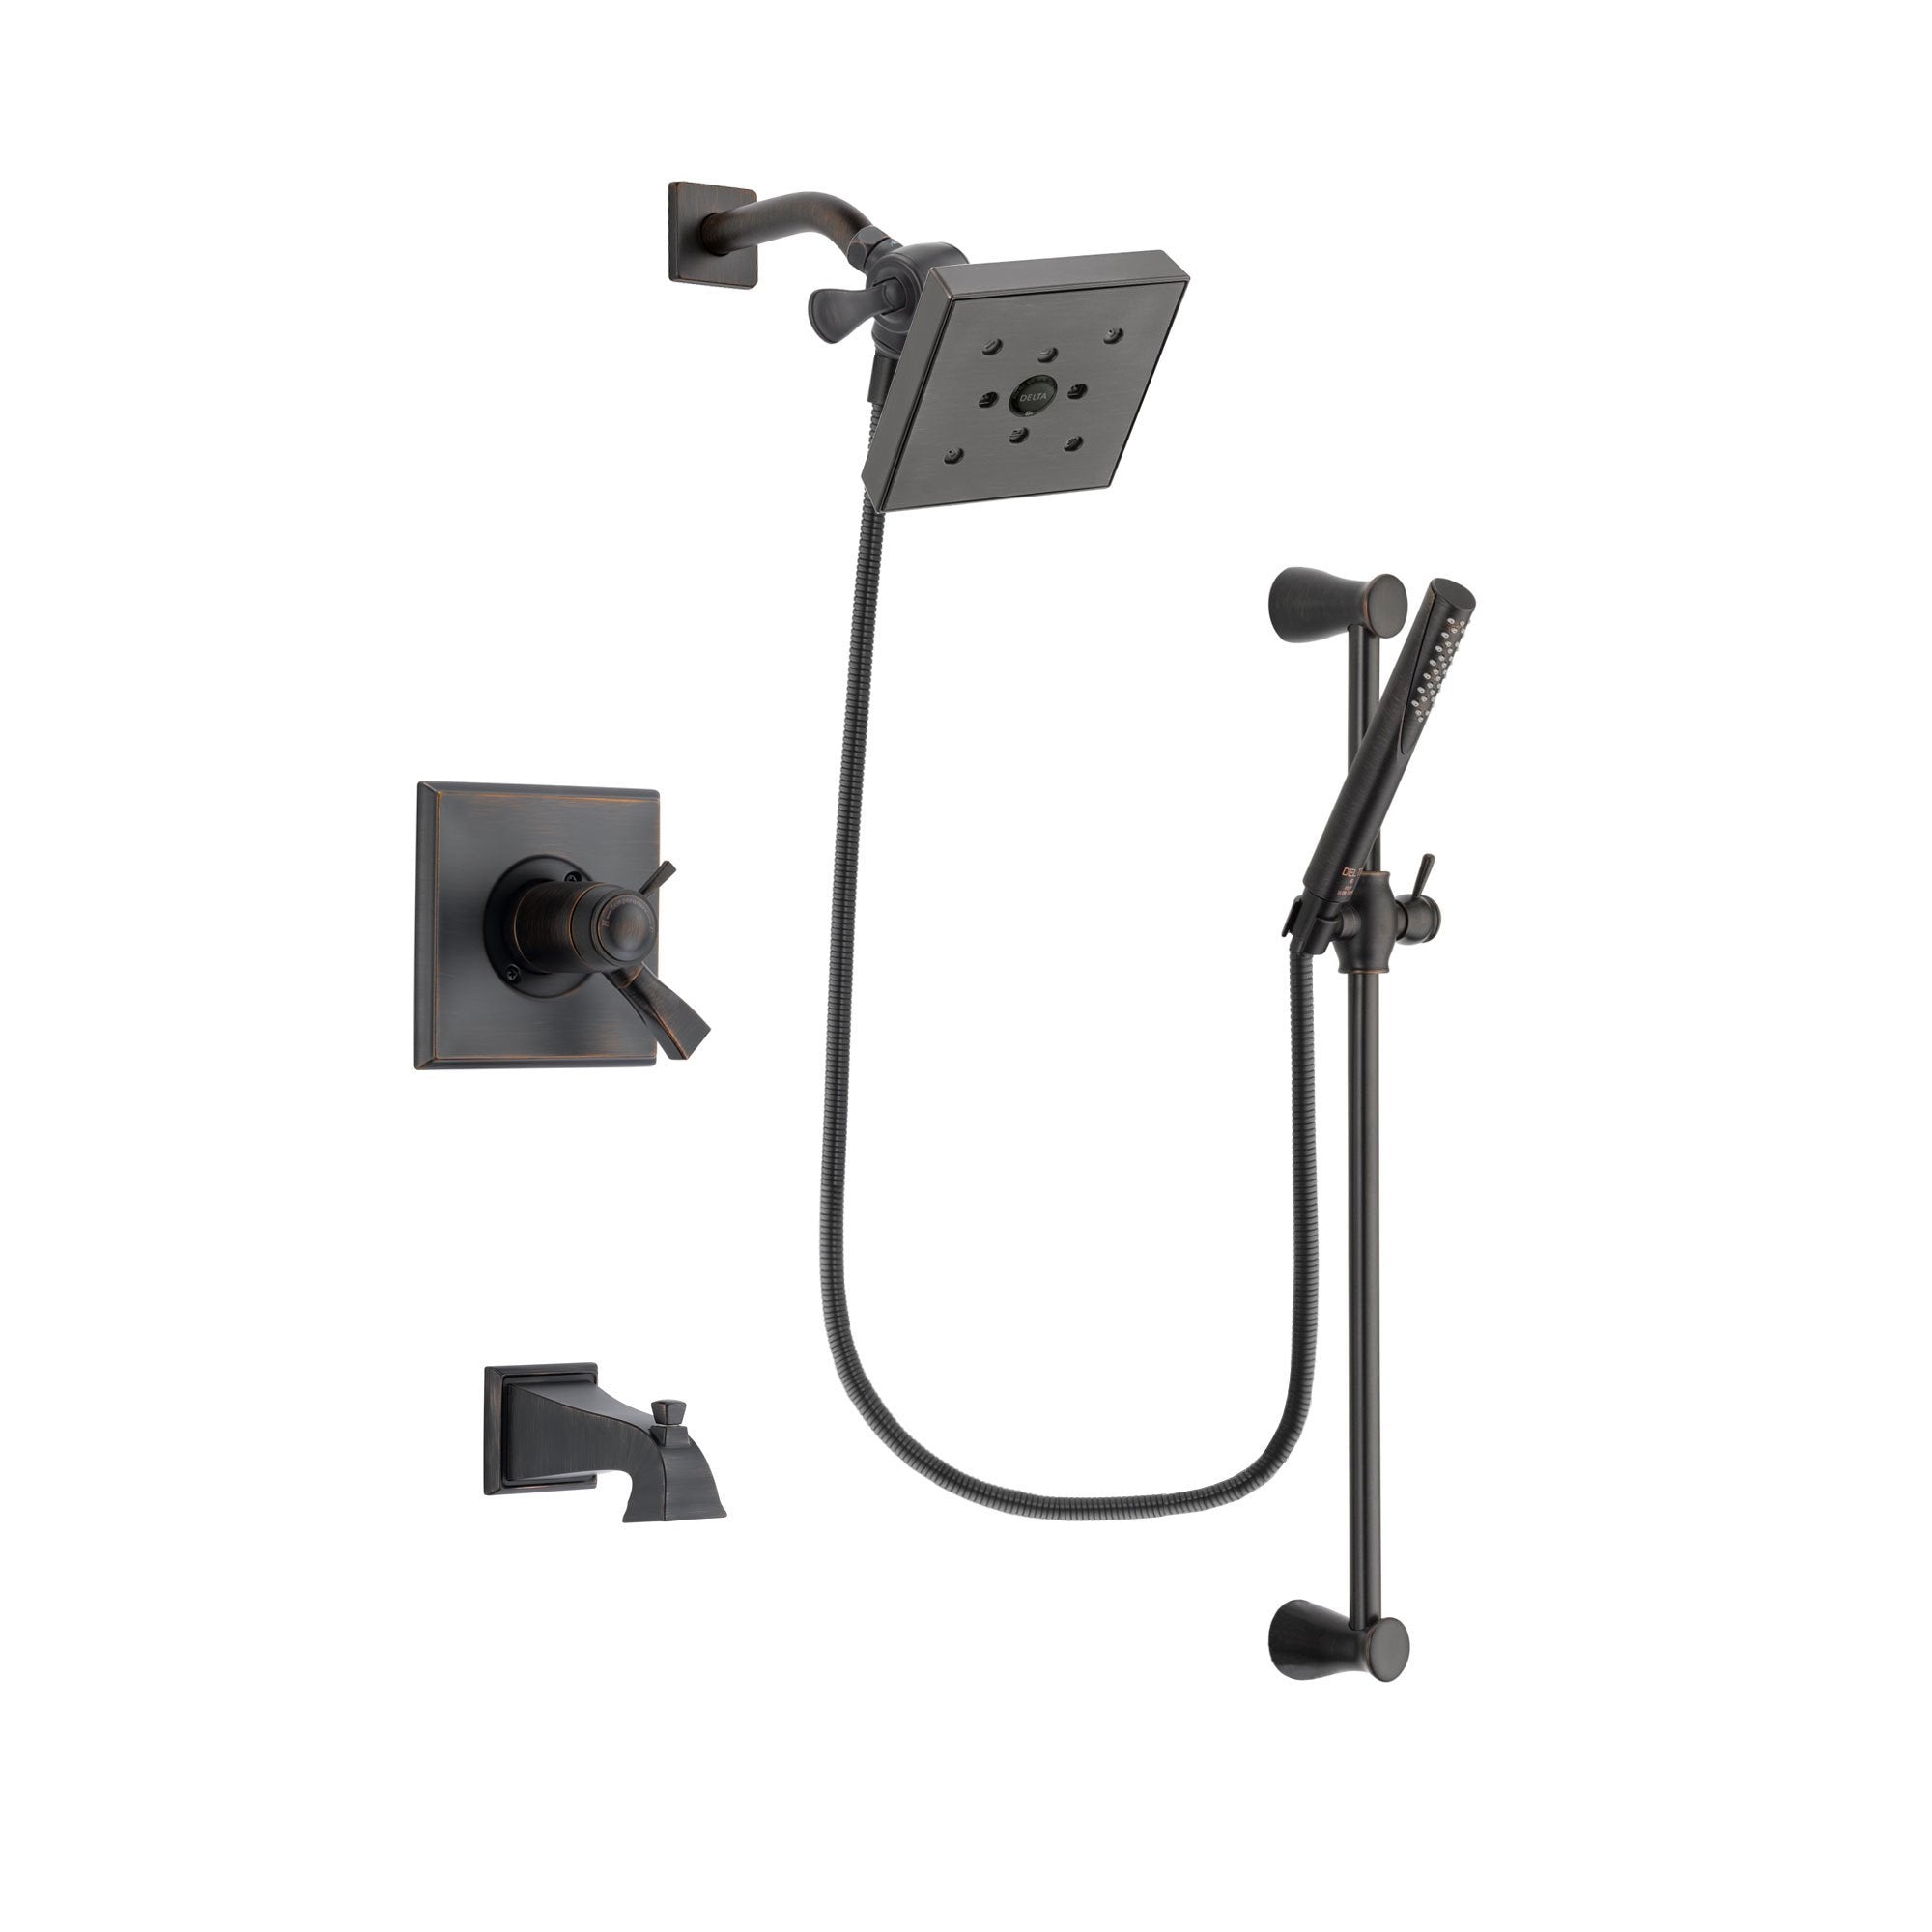 Delta Dryden Venetian Bronze Finish Thermostatic Tub and Shower Faucet System Package with Square Shower Head and Modern Hand Shower with Slide Bar Includes Rough-in Valve and Tub Spout DSP3161V